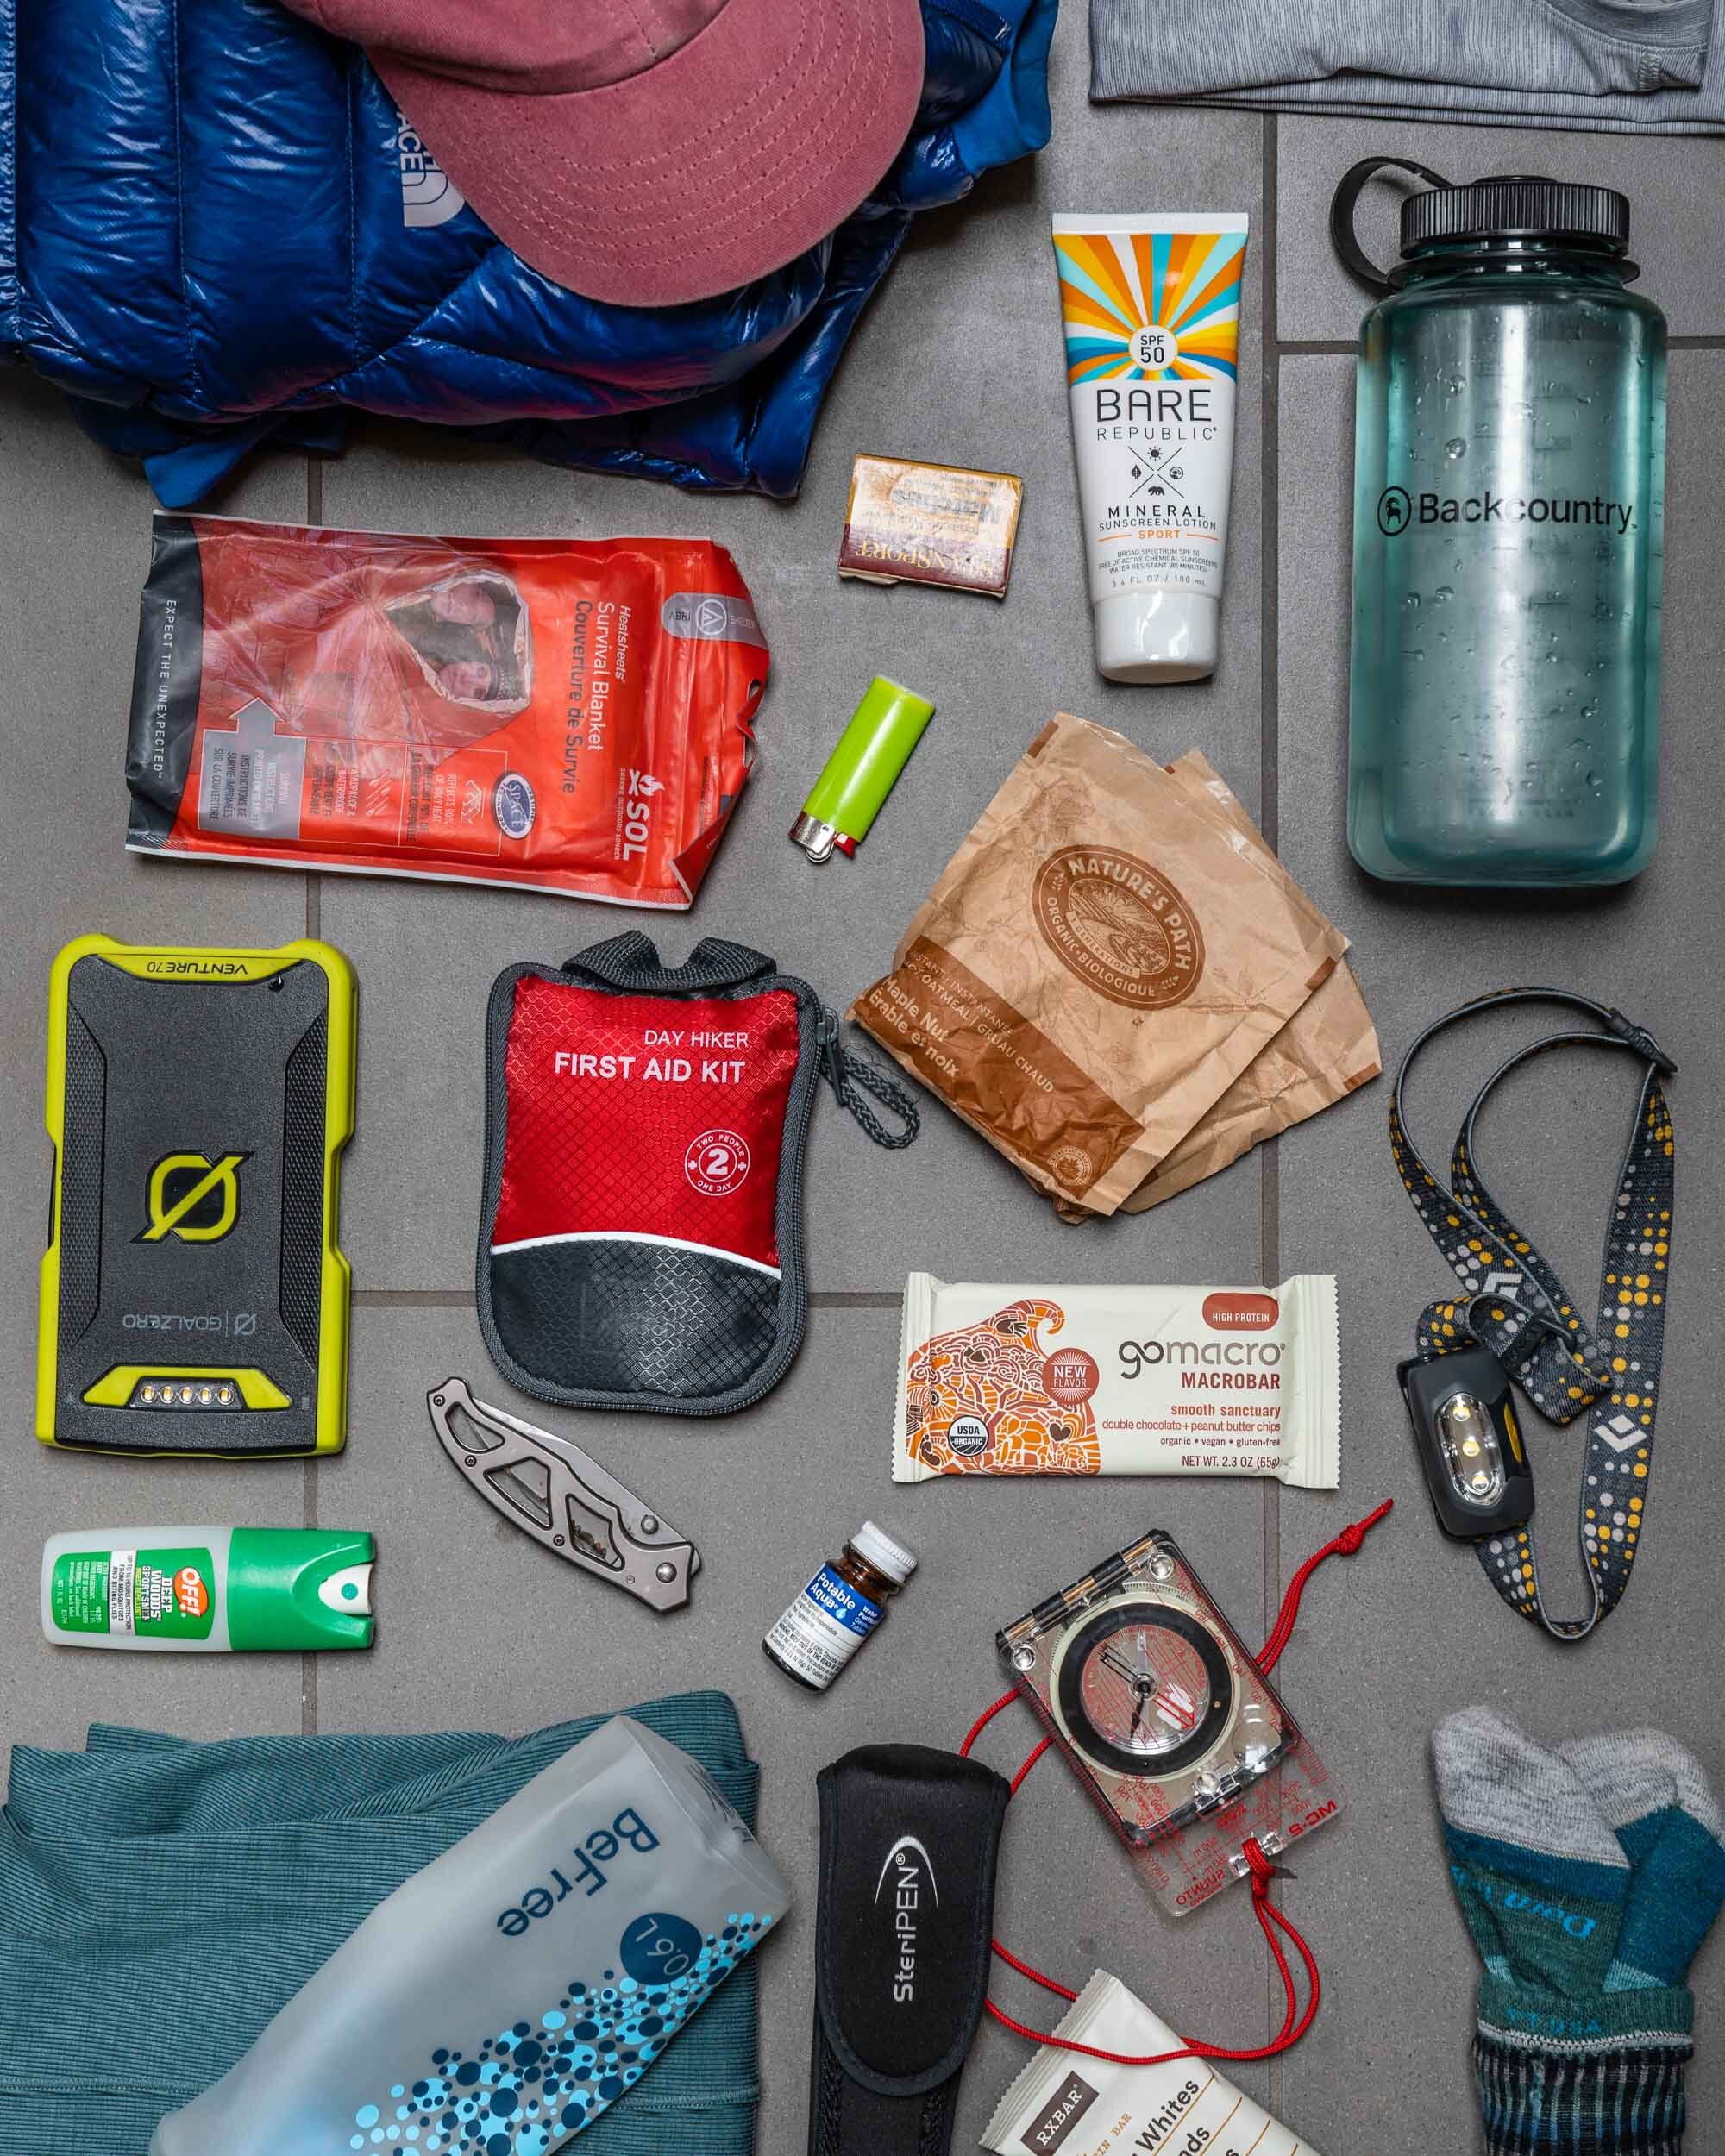 Survival items such as sunscreen, knife, lighter, etc